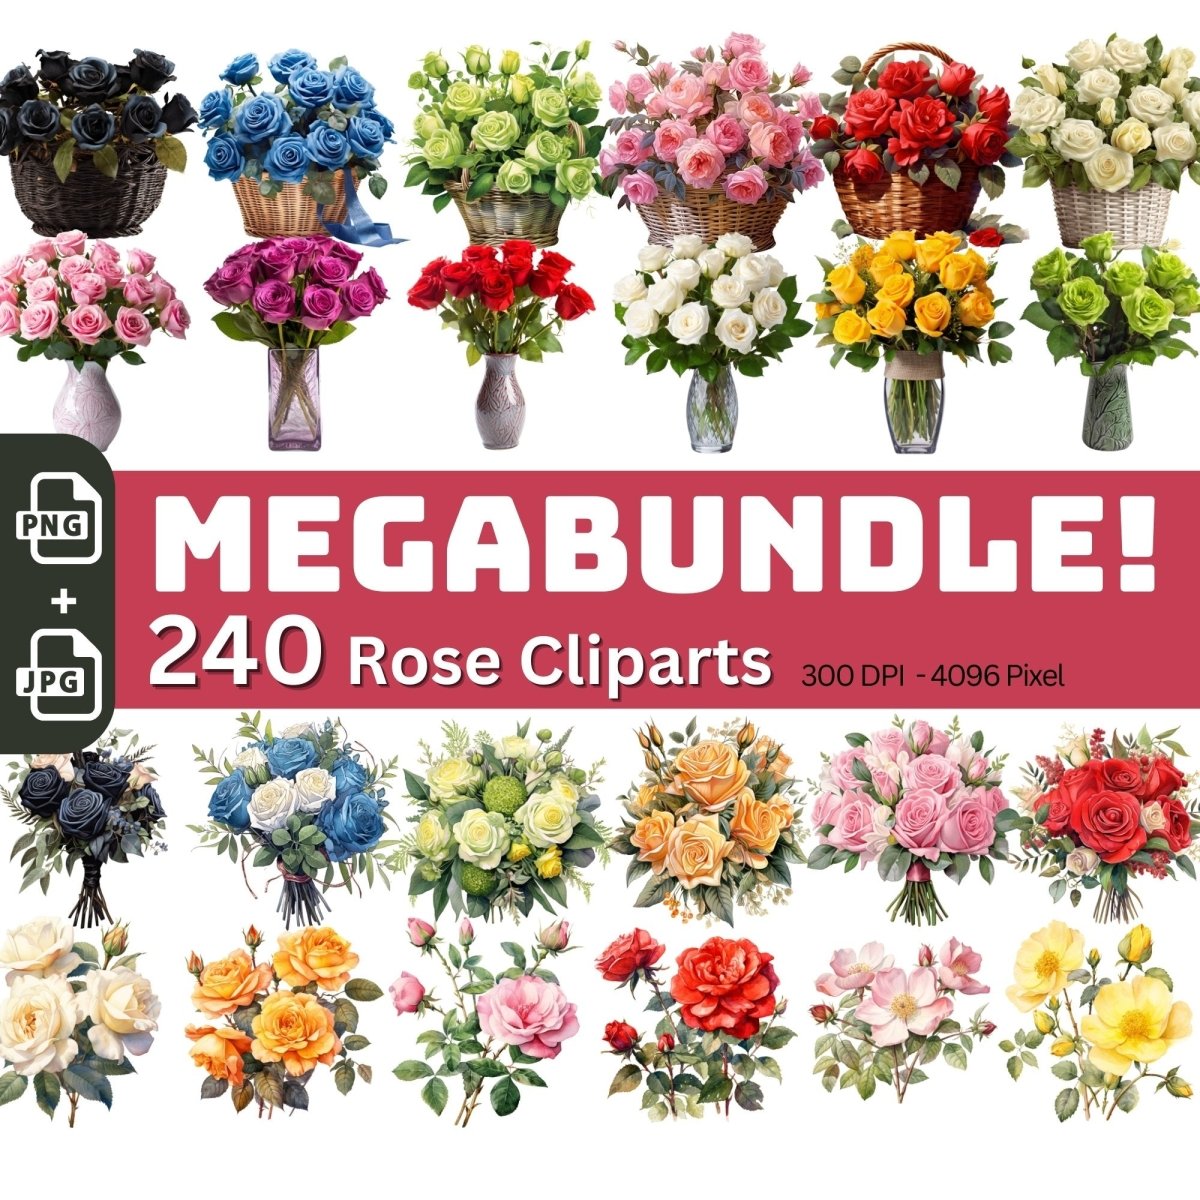 Roses Megabundle 240+240 High Quality PNGs Floral Clipart - Everything Pixel